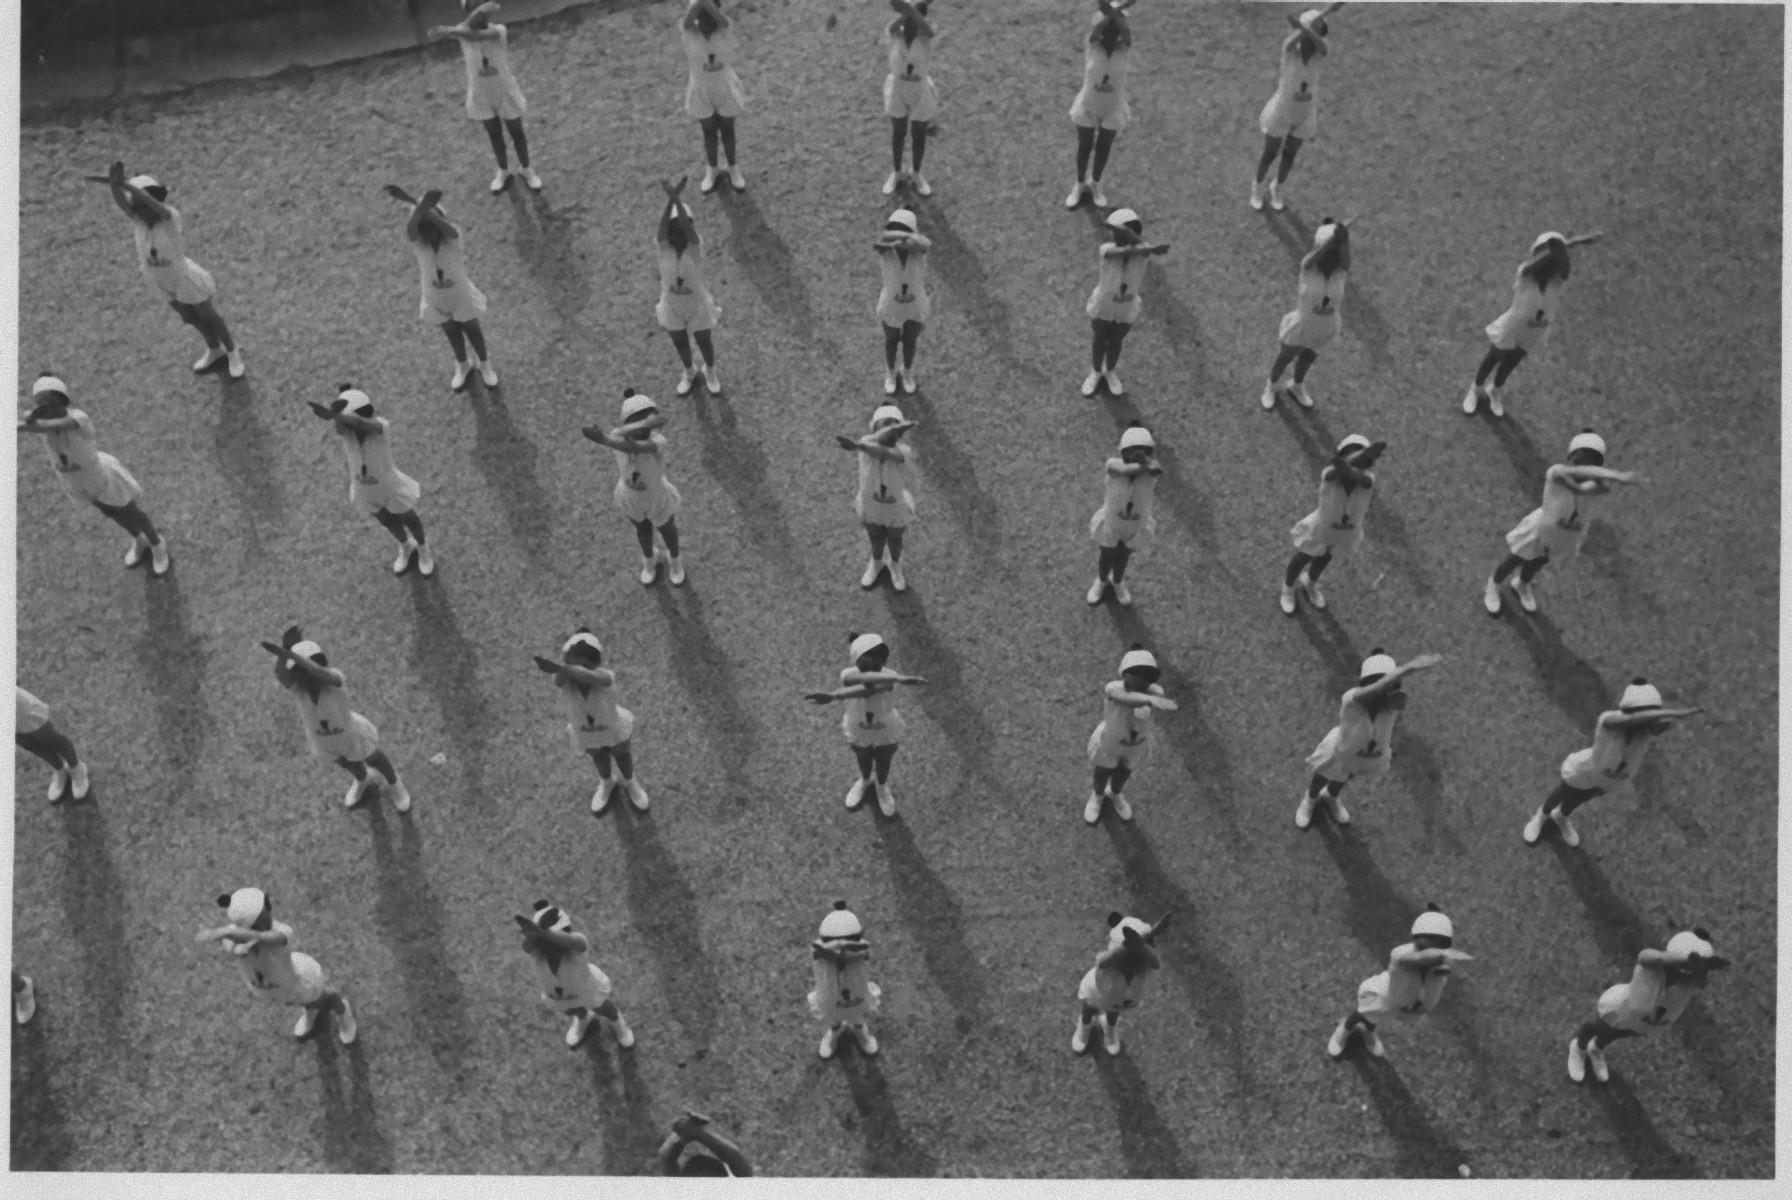 Unknown Figurative Photograph - Fascism Period in Italy - Gymnastics in a Stadium - Vintage b/w Photo - 1930